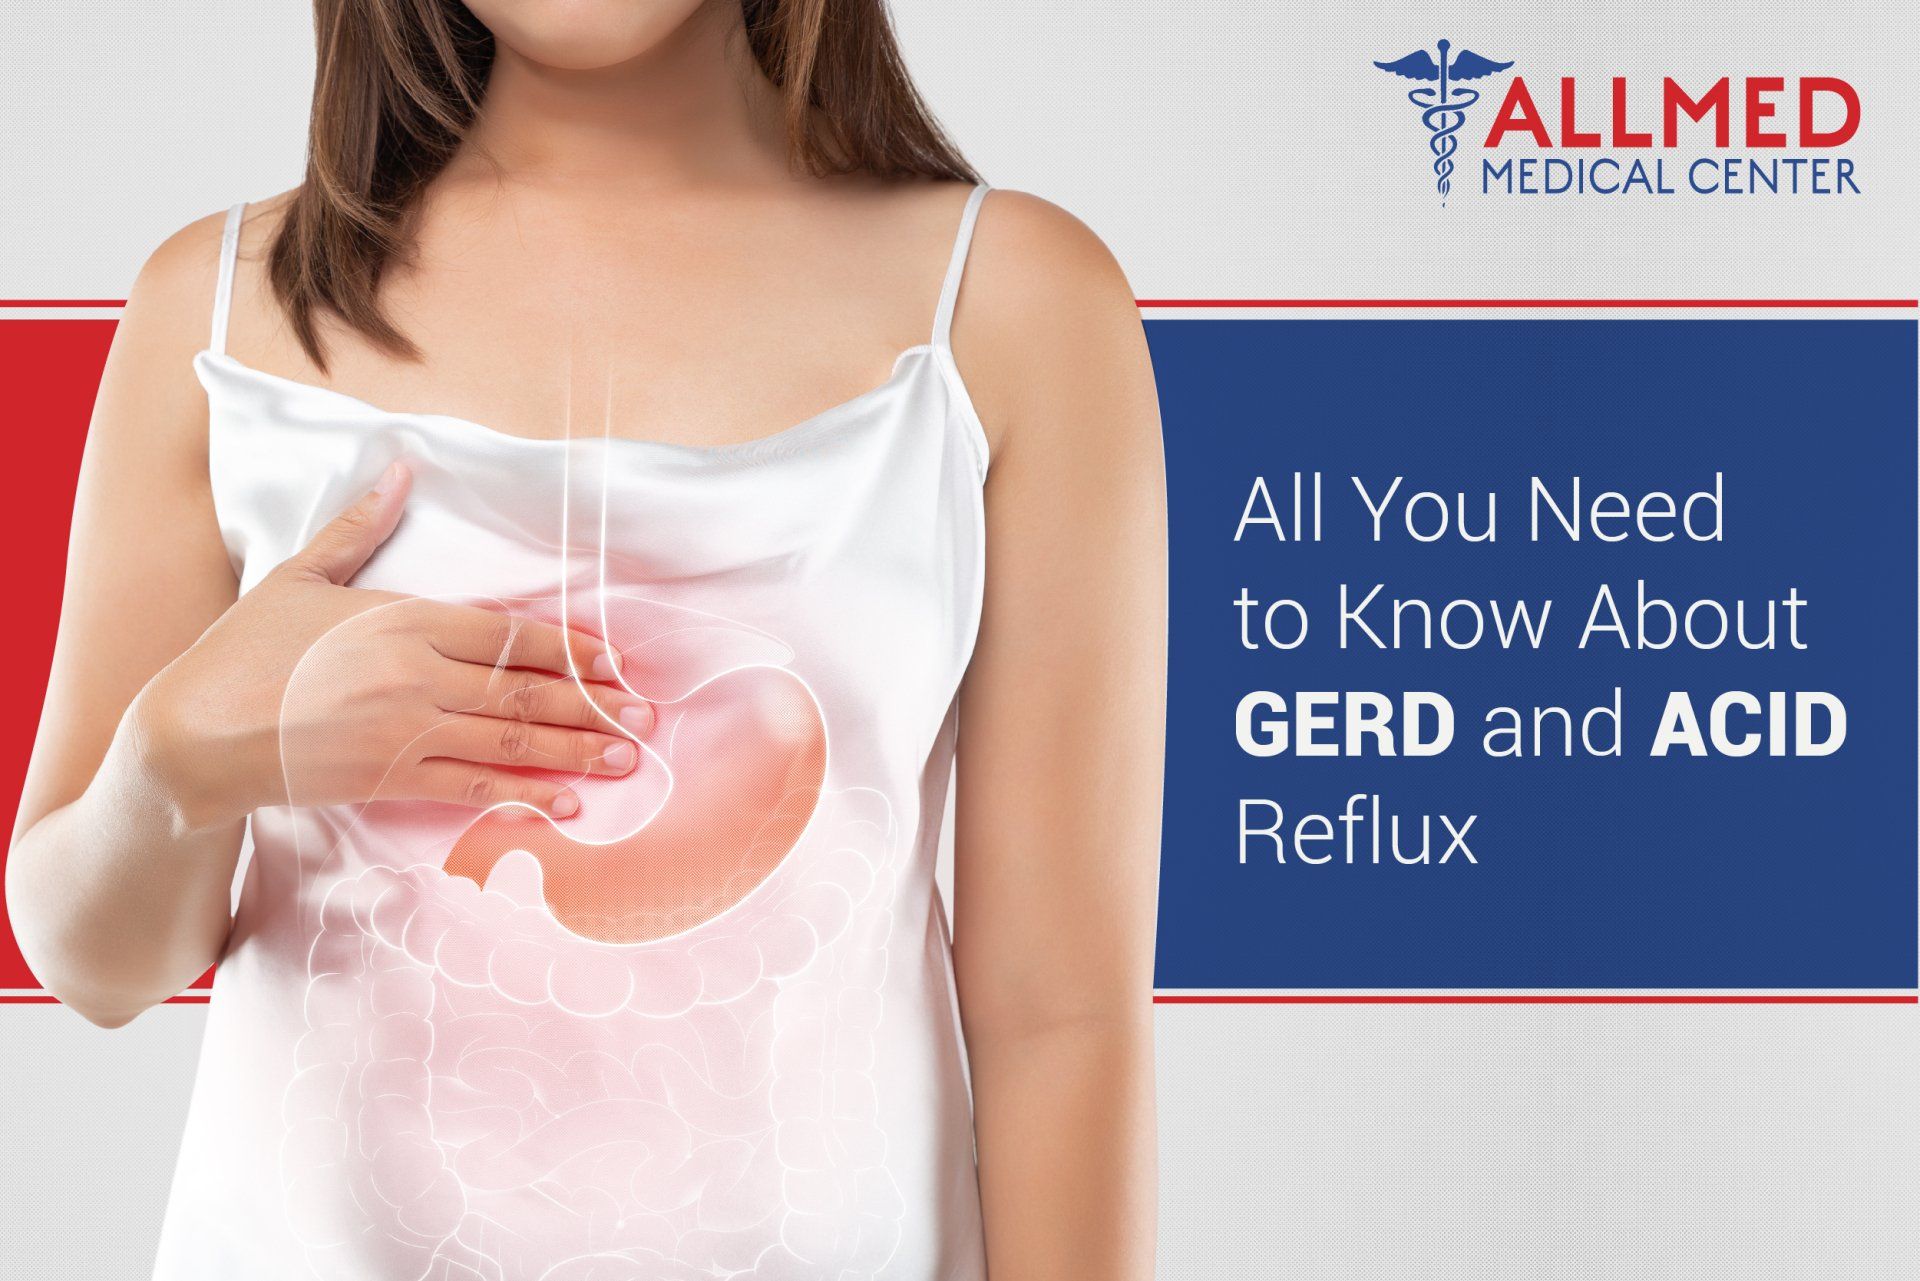 All You Need to Know About GERD and Acid Reflux